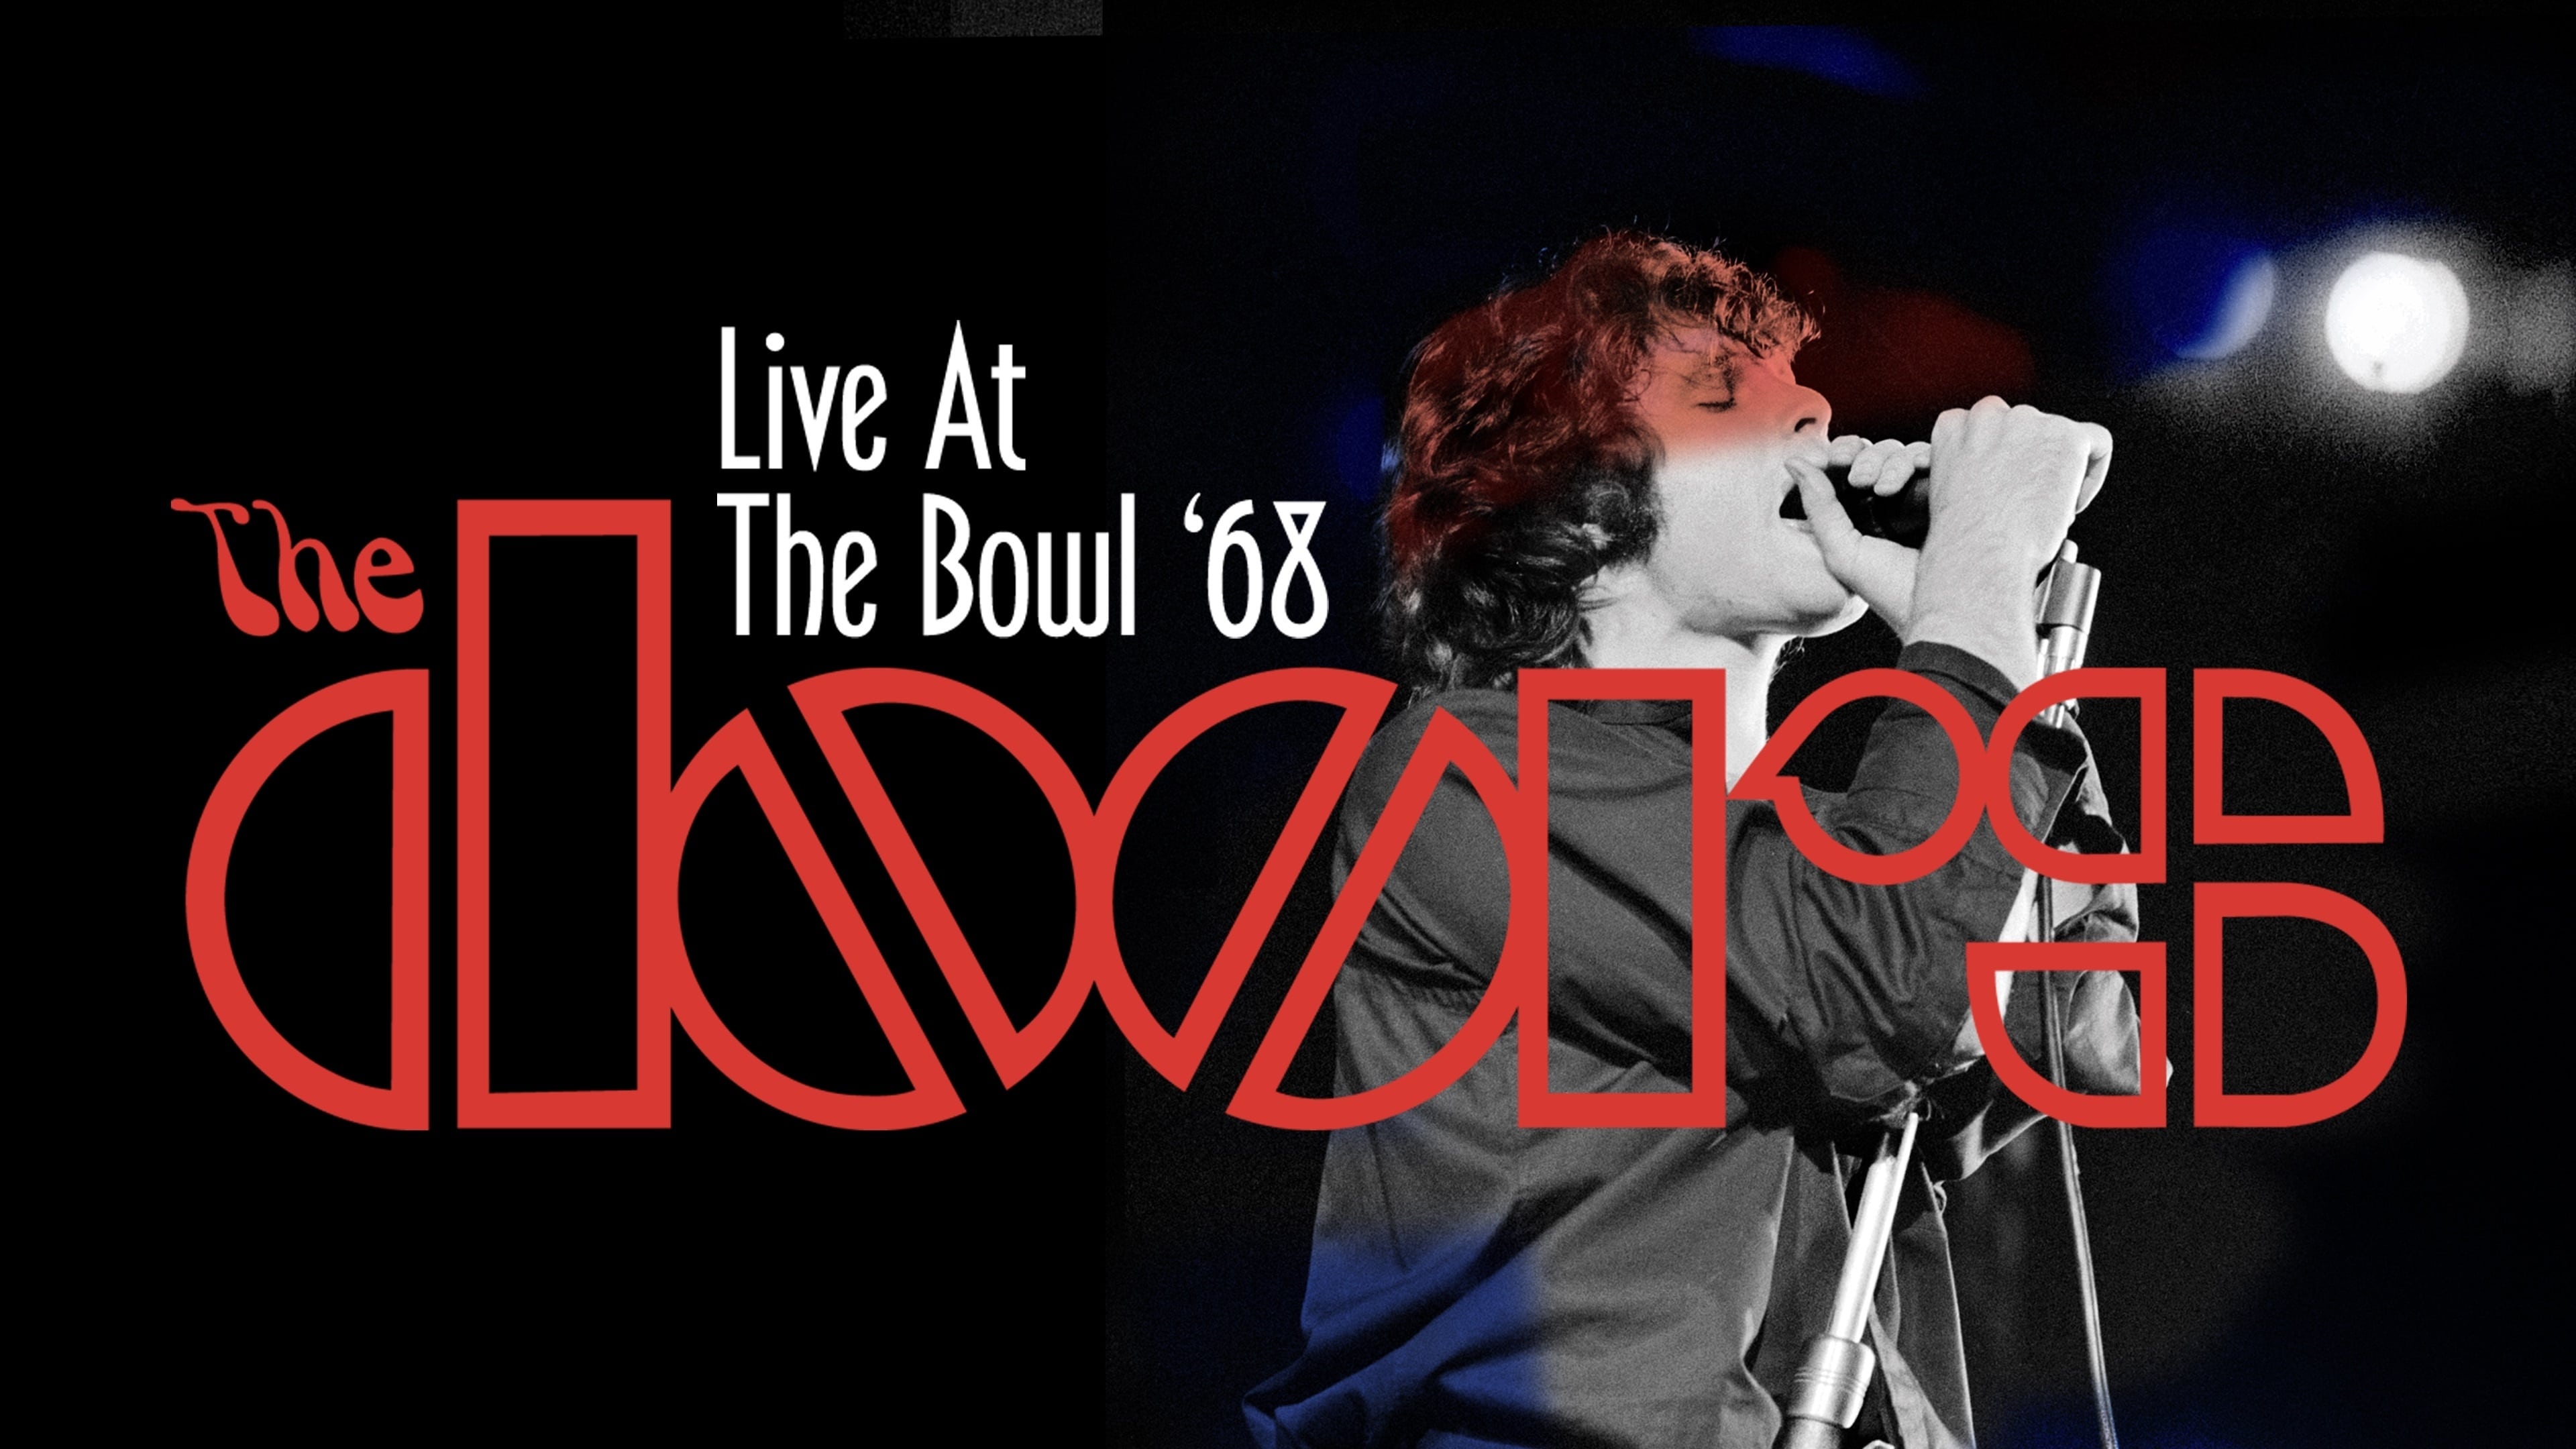 The Doors: Live at the Bowl '68 (2012)